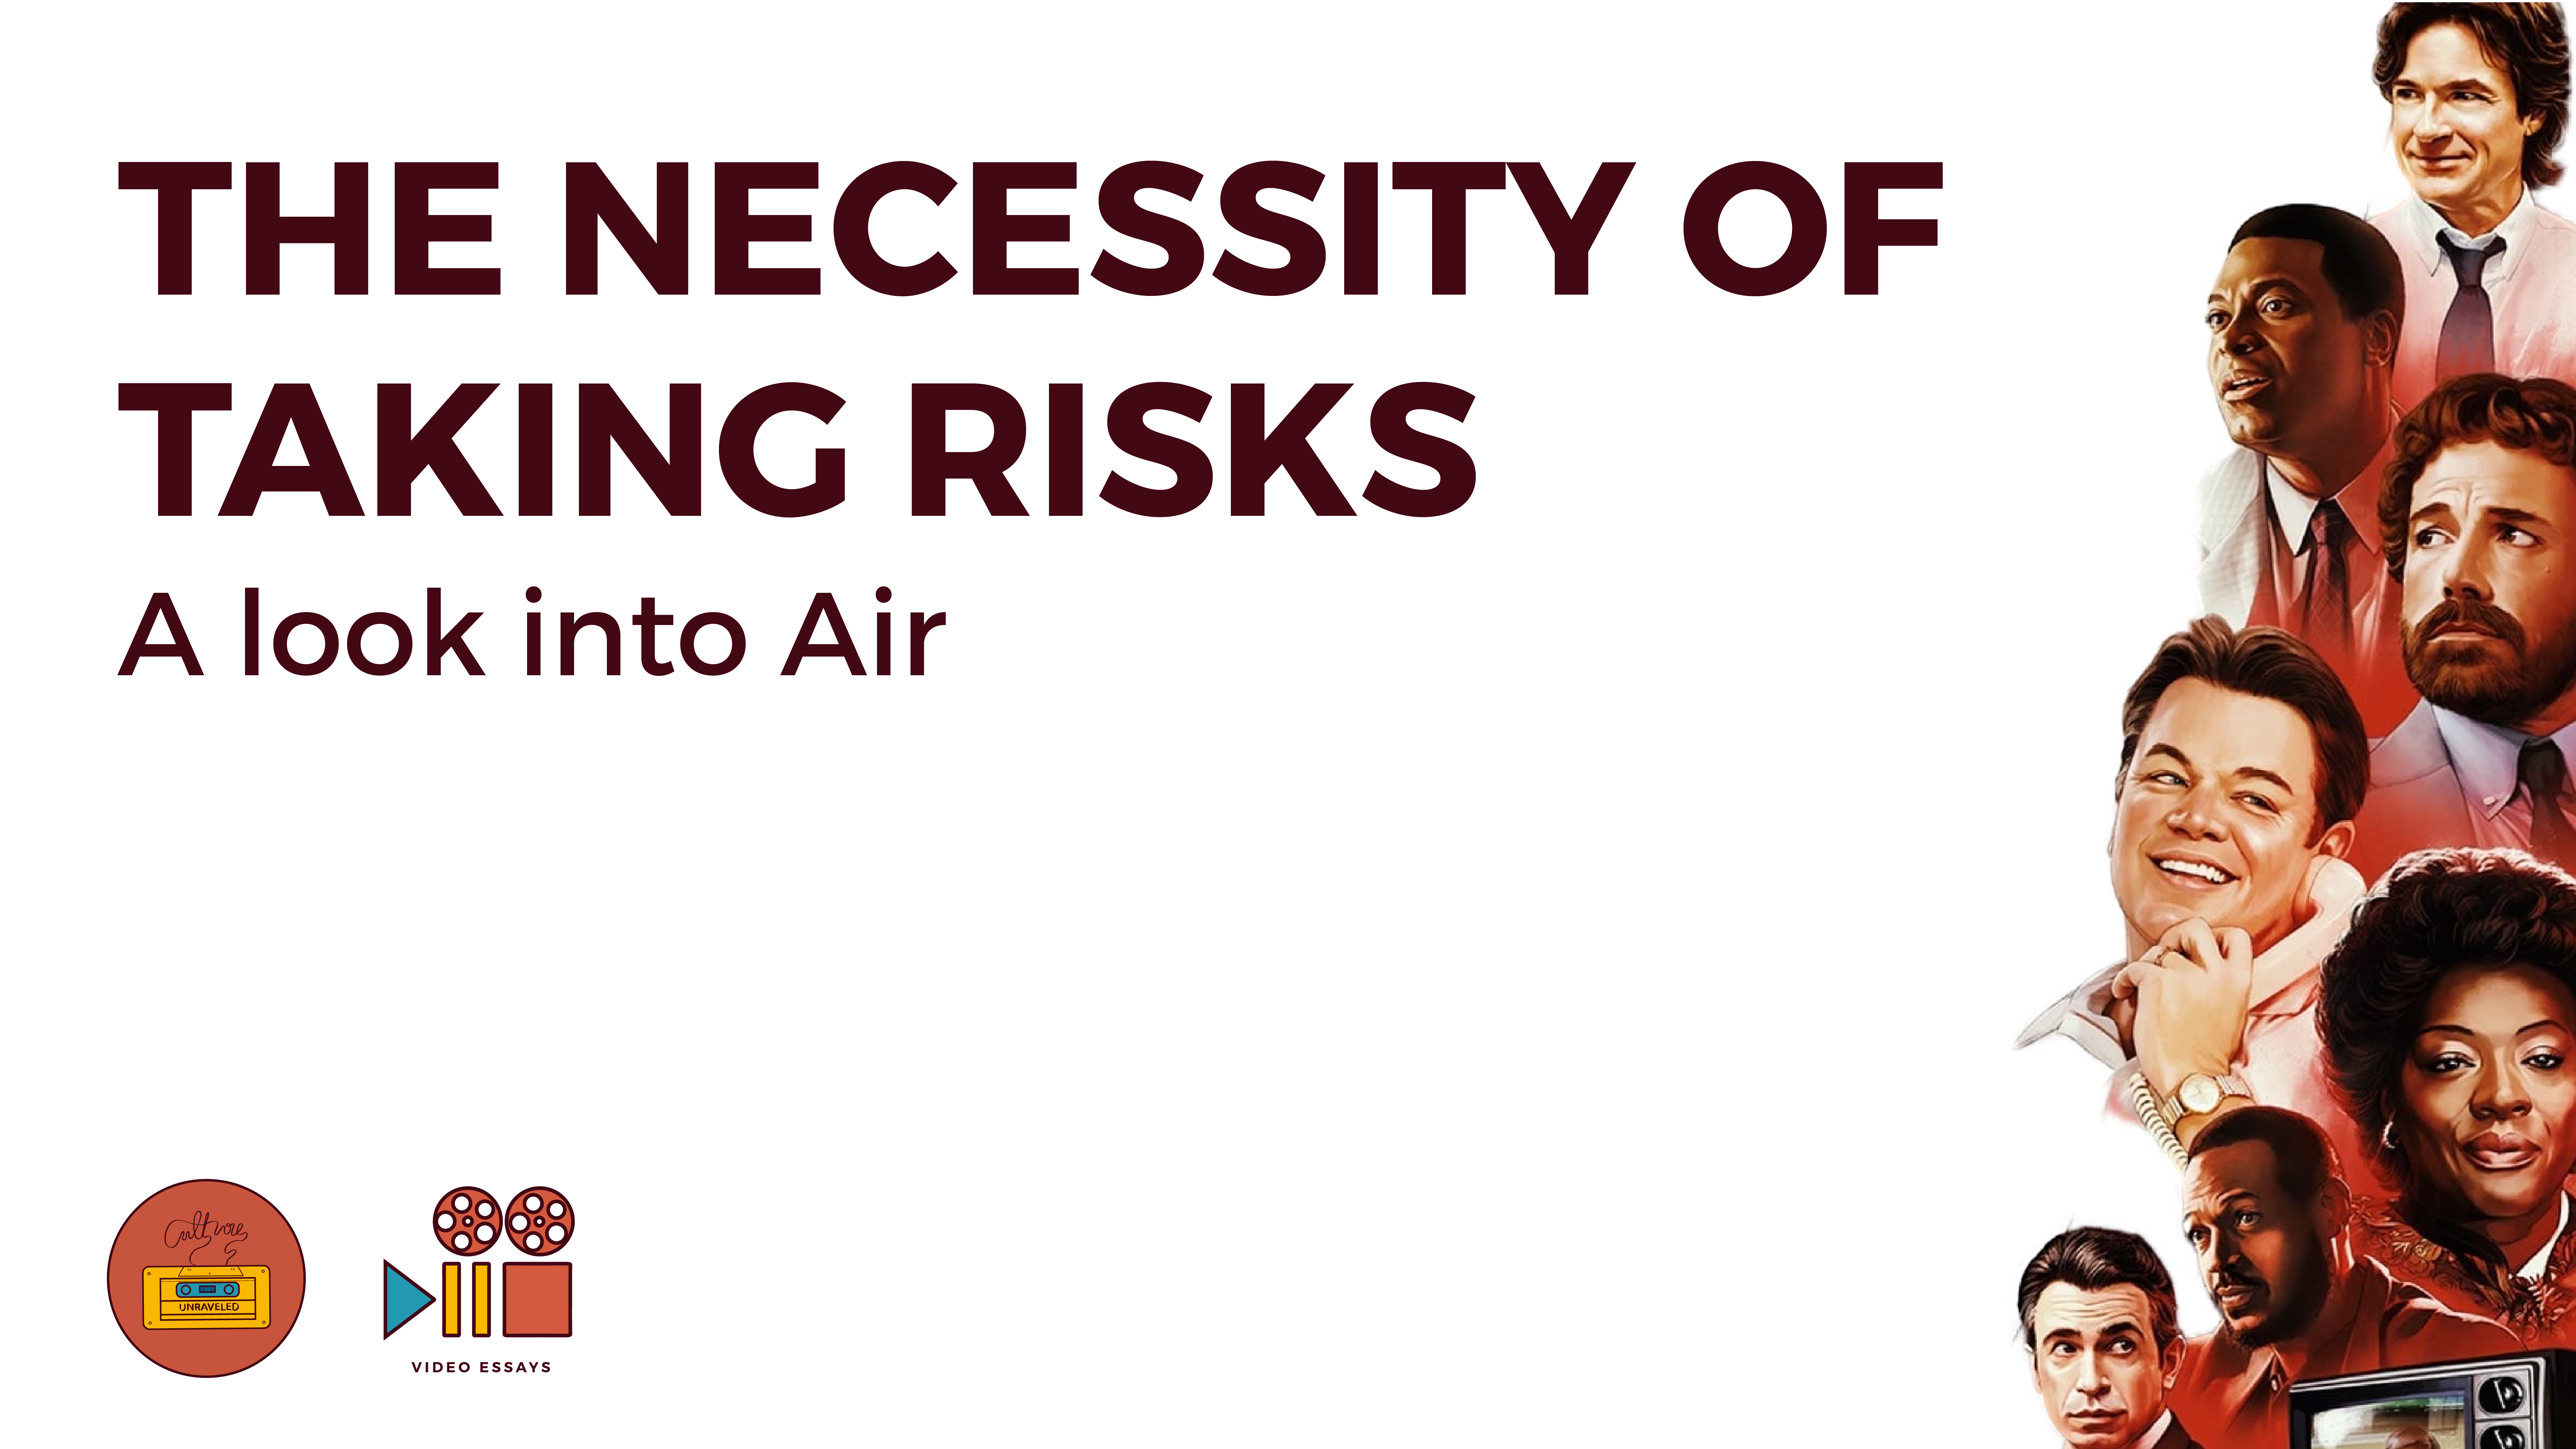 The Necessity of Taking Risks. A Look into Air